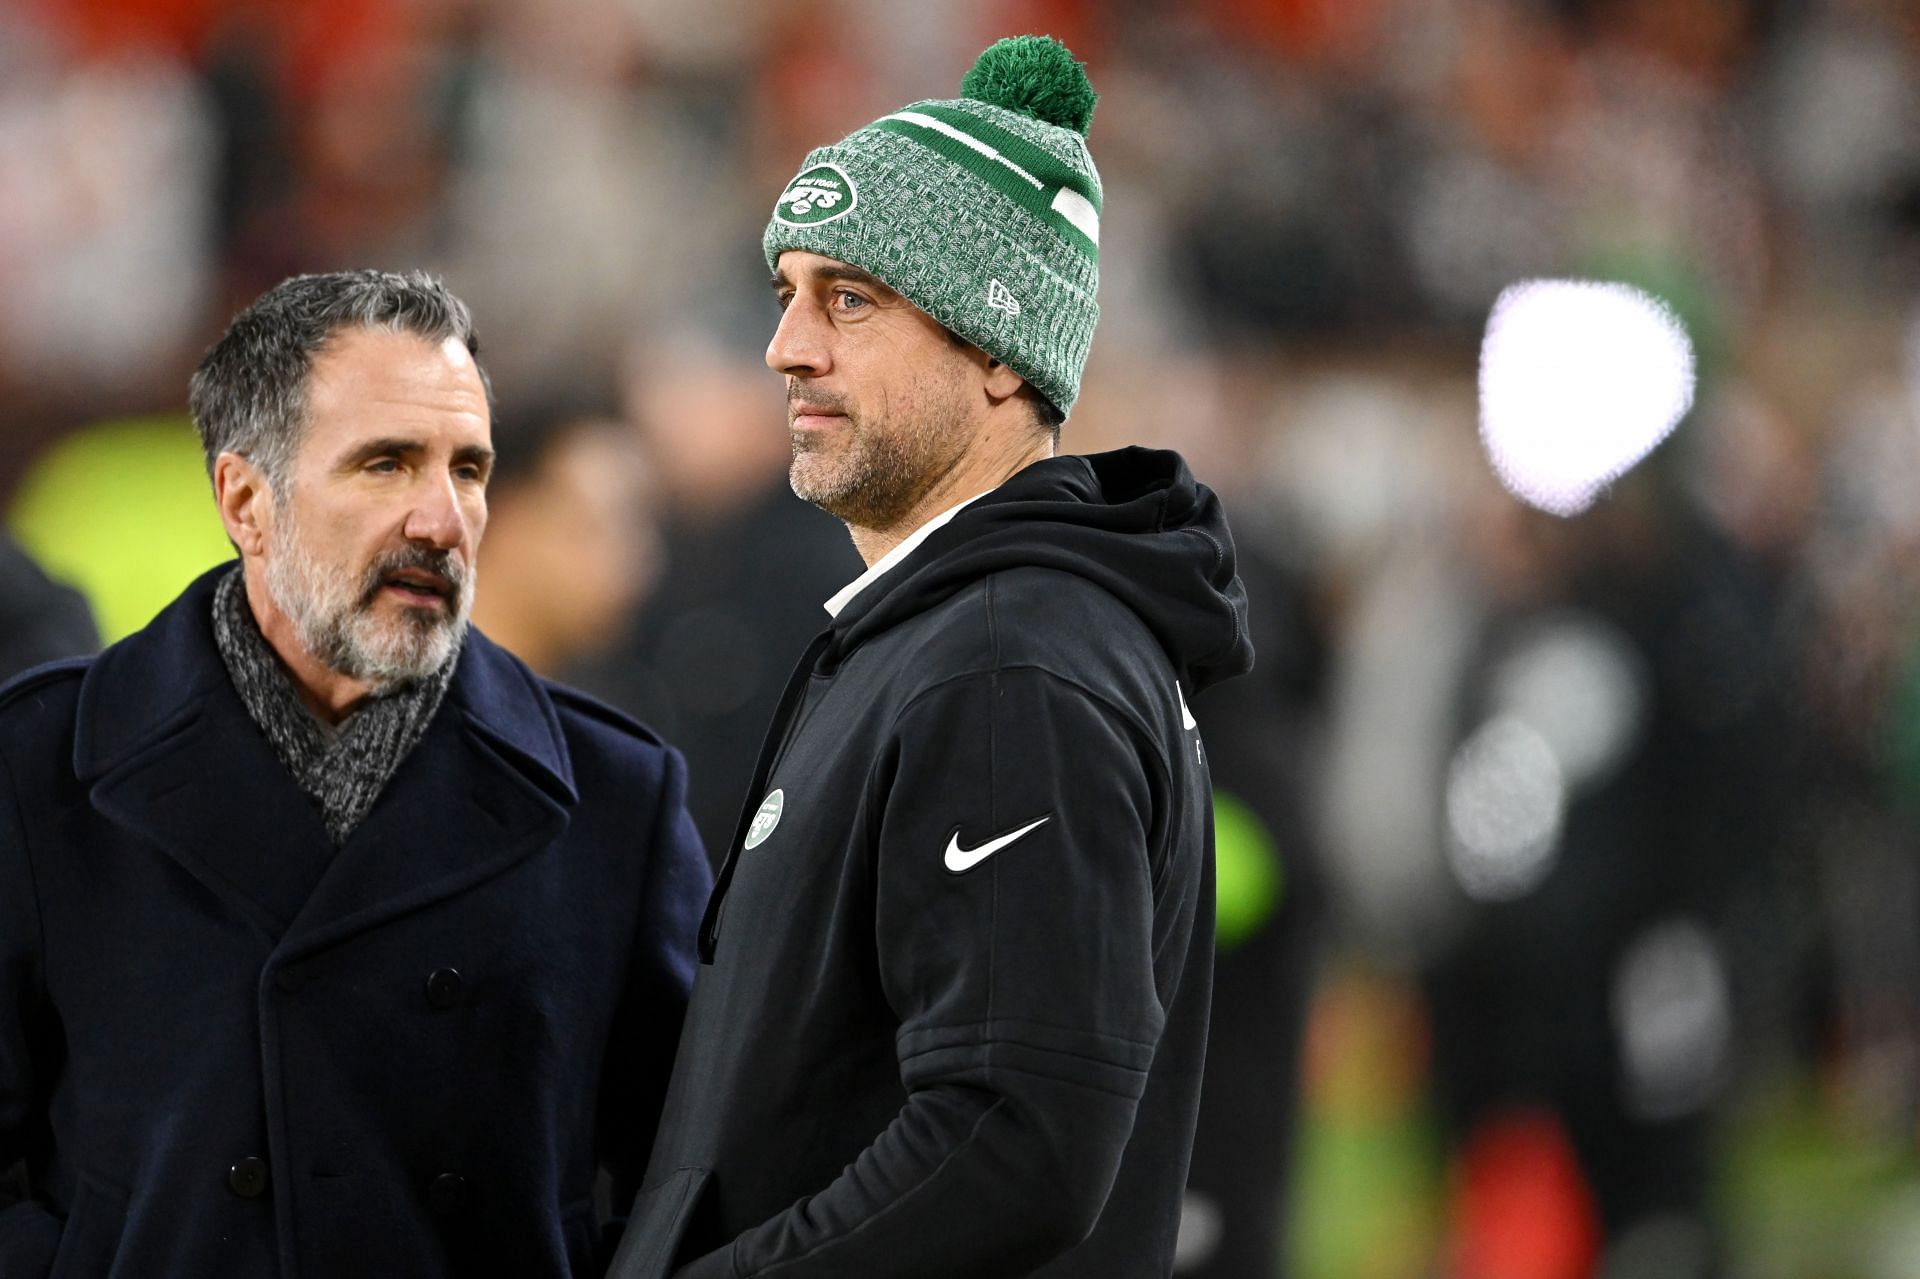 Aaron Rodgers at New York Jets v Cleveland Browns